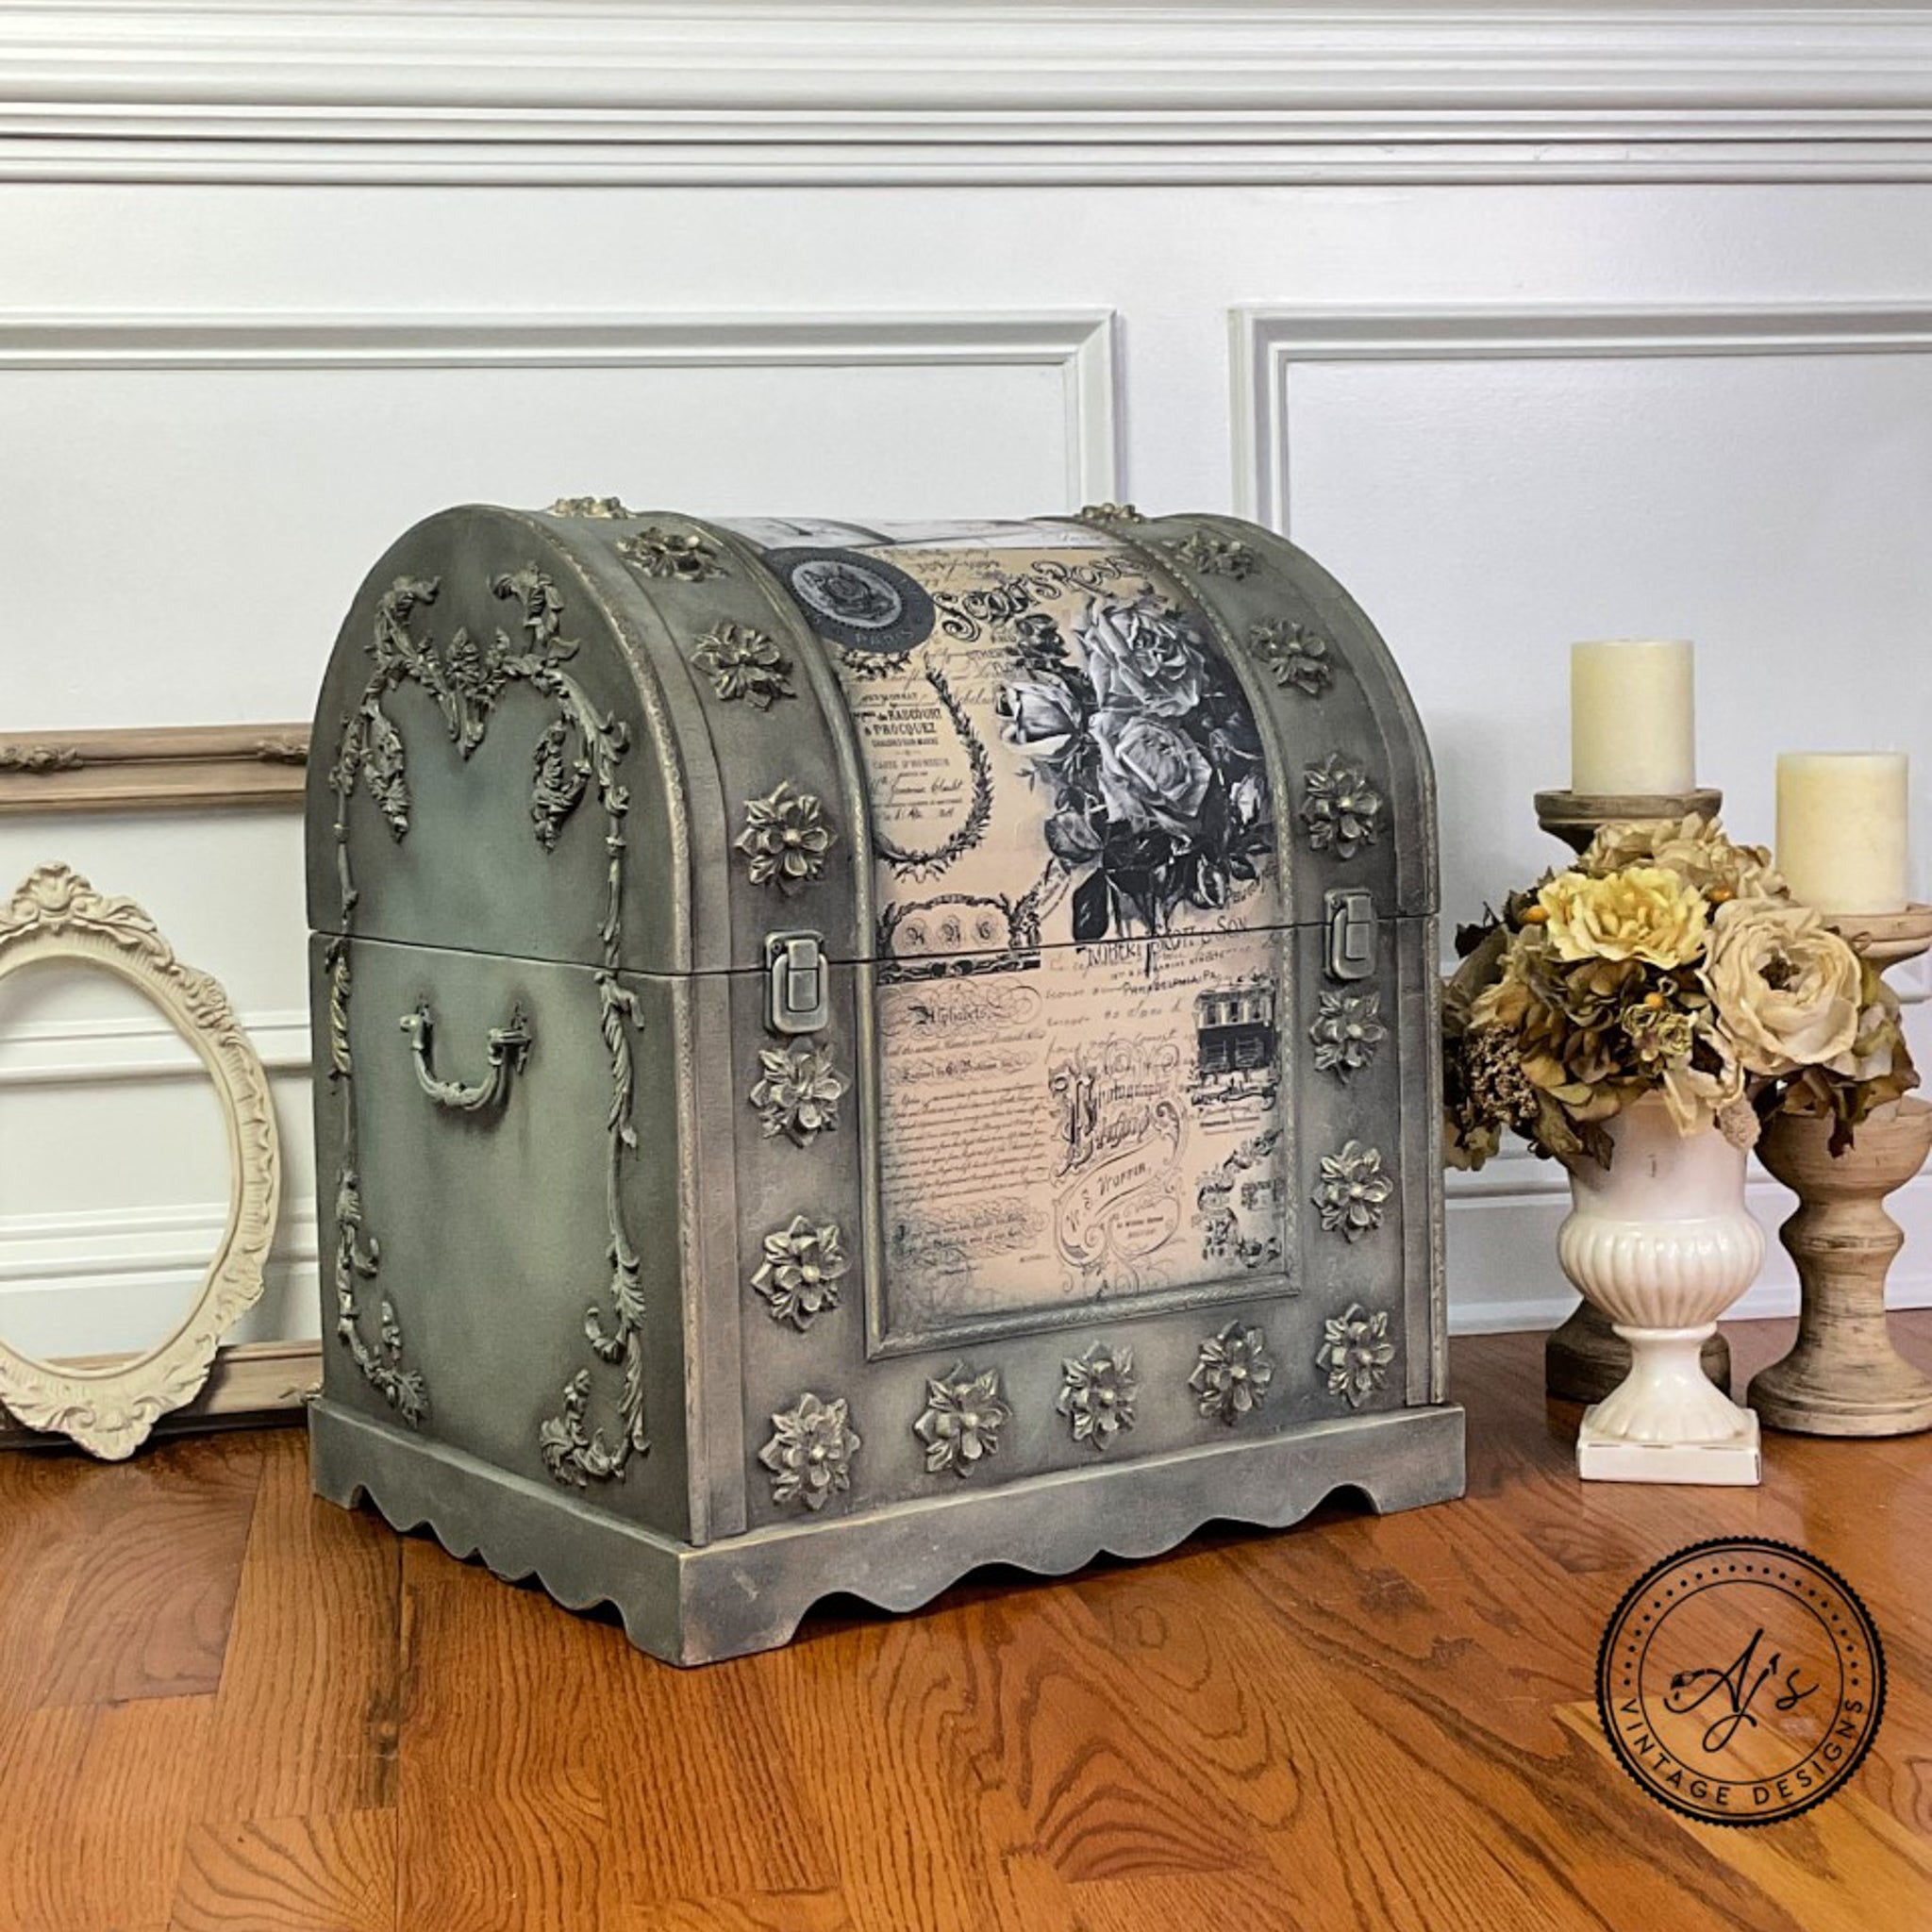 A vintage chest box refurbished by AJ's Vintage Deisngs is painted grey-green with silicone mold castings and features the Vintage Post Transfer across the top and front center.